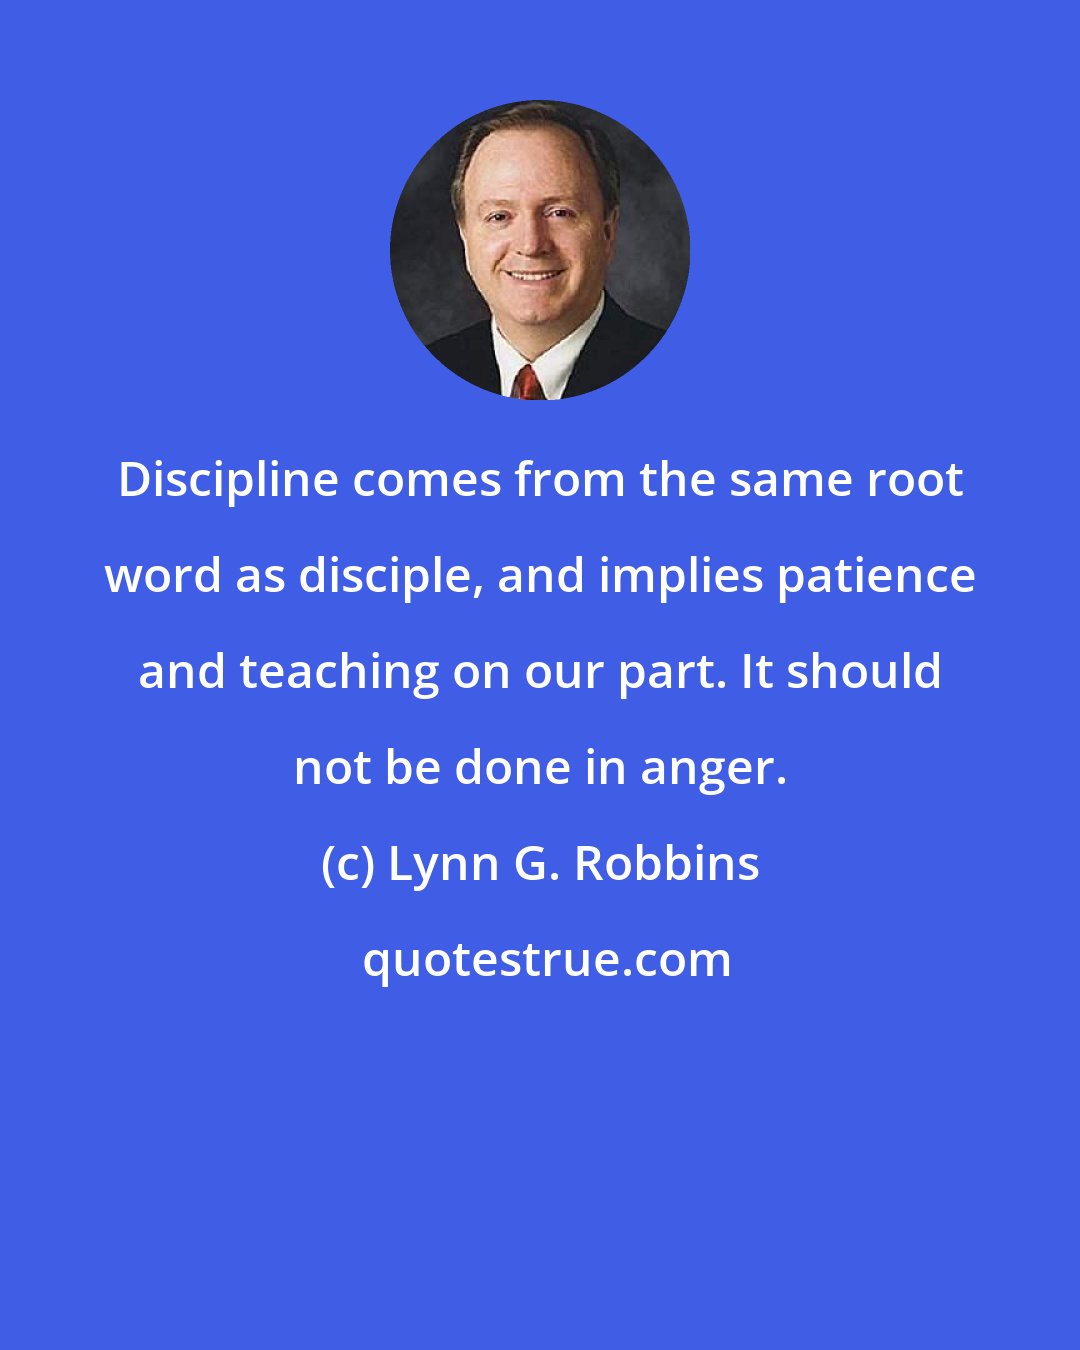 Lynn G. Robbins: Discipline comes from the same root word as disciple, and implies patience and teaching on our part. It should not be done in anger.